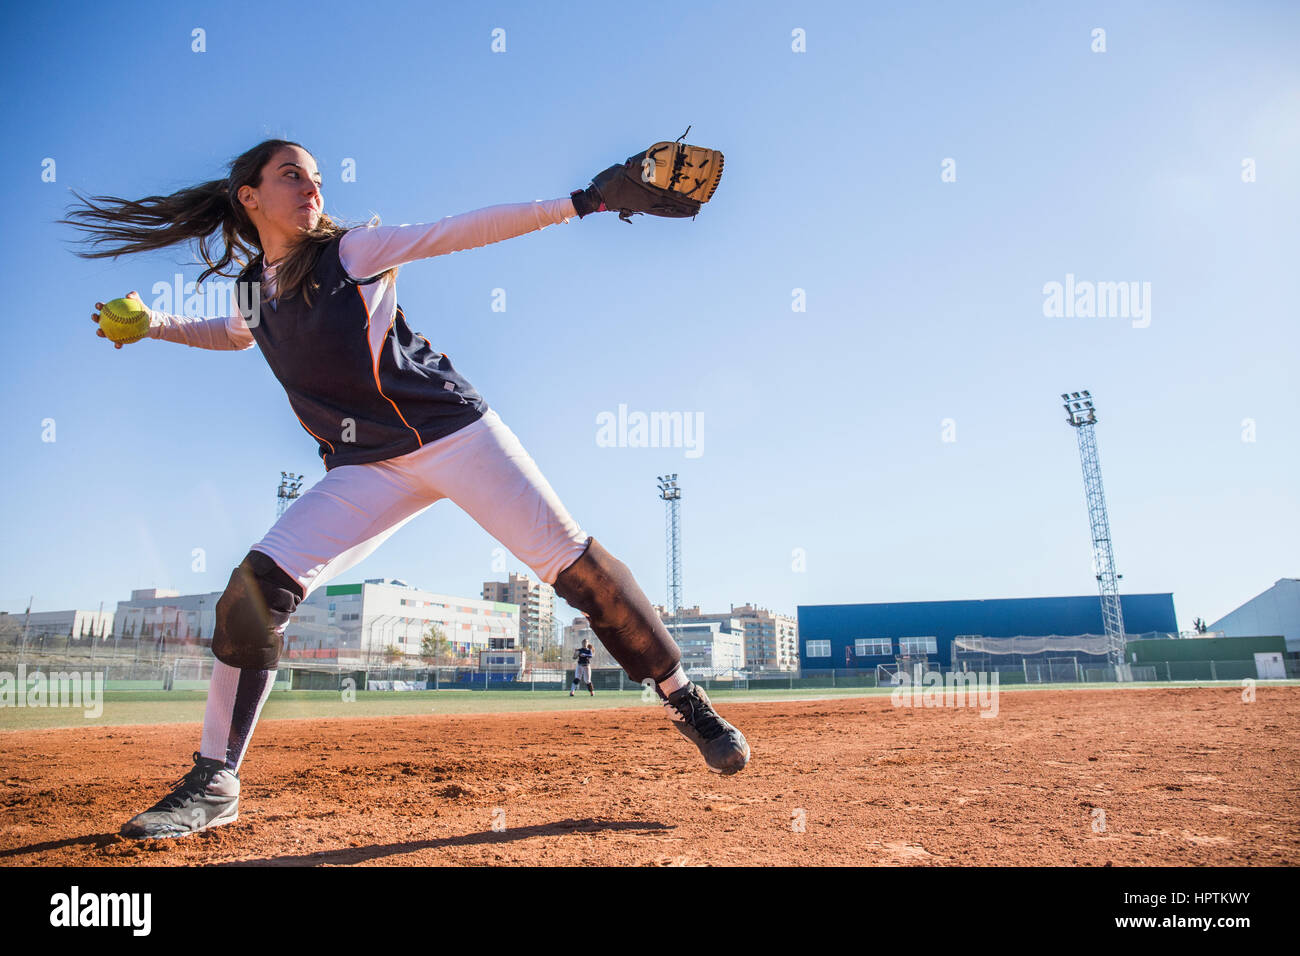 Female baseball player throwing the ball during a baseball game Stock Photo